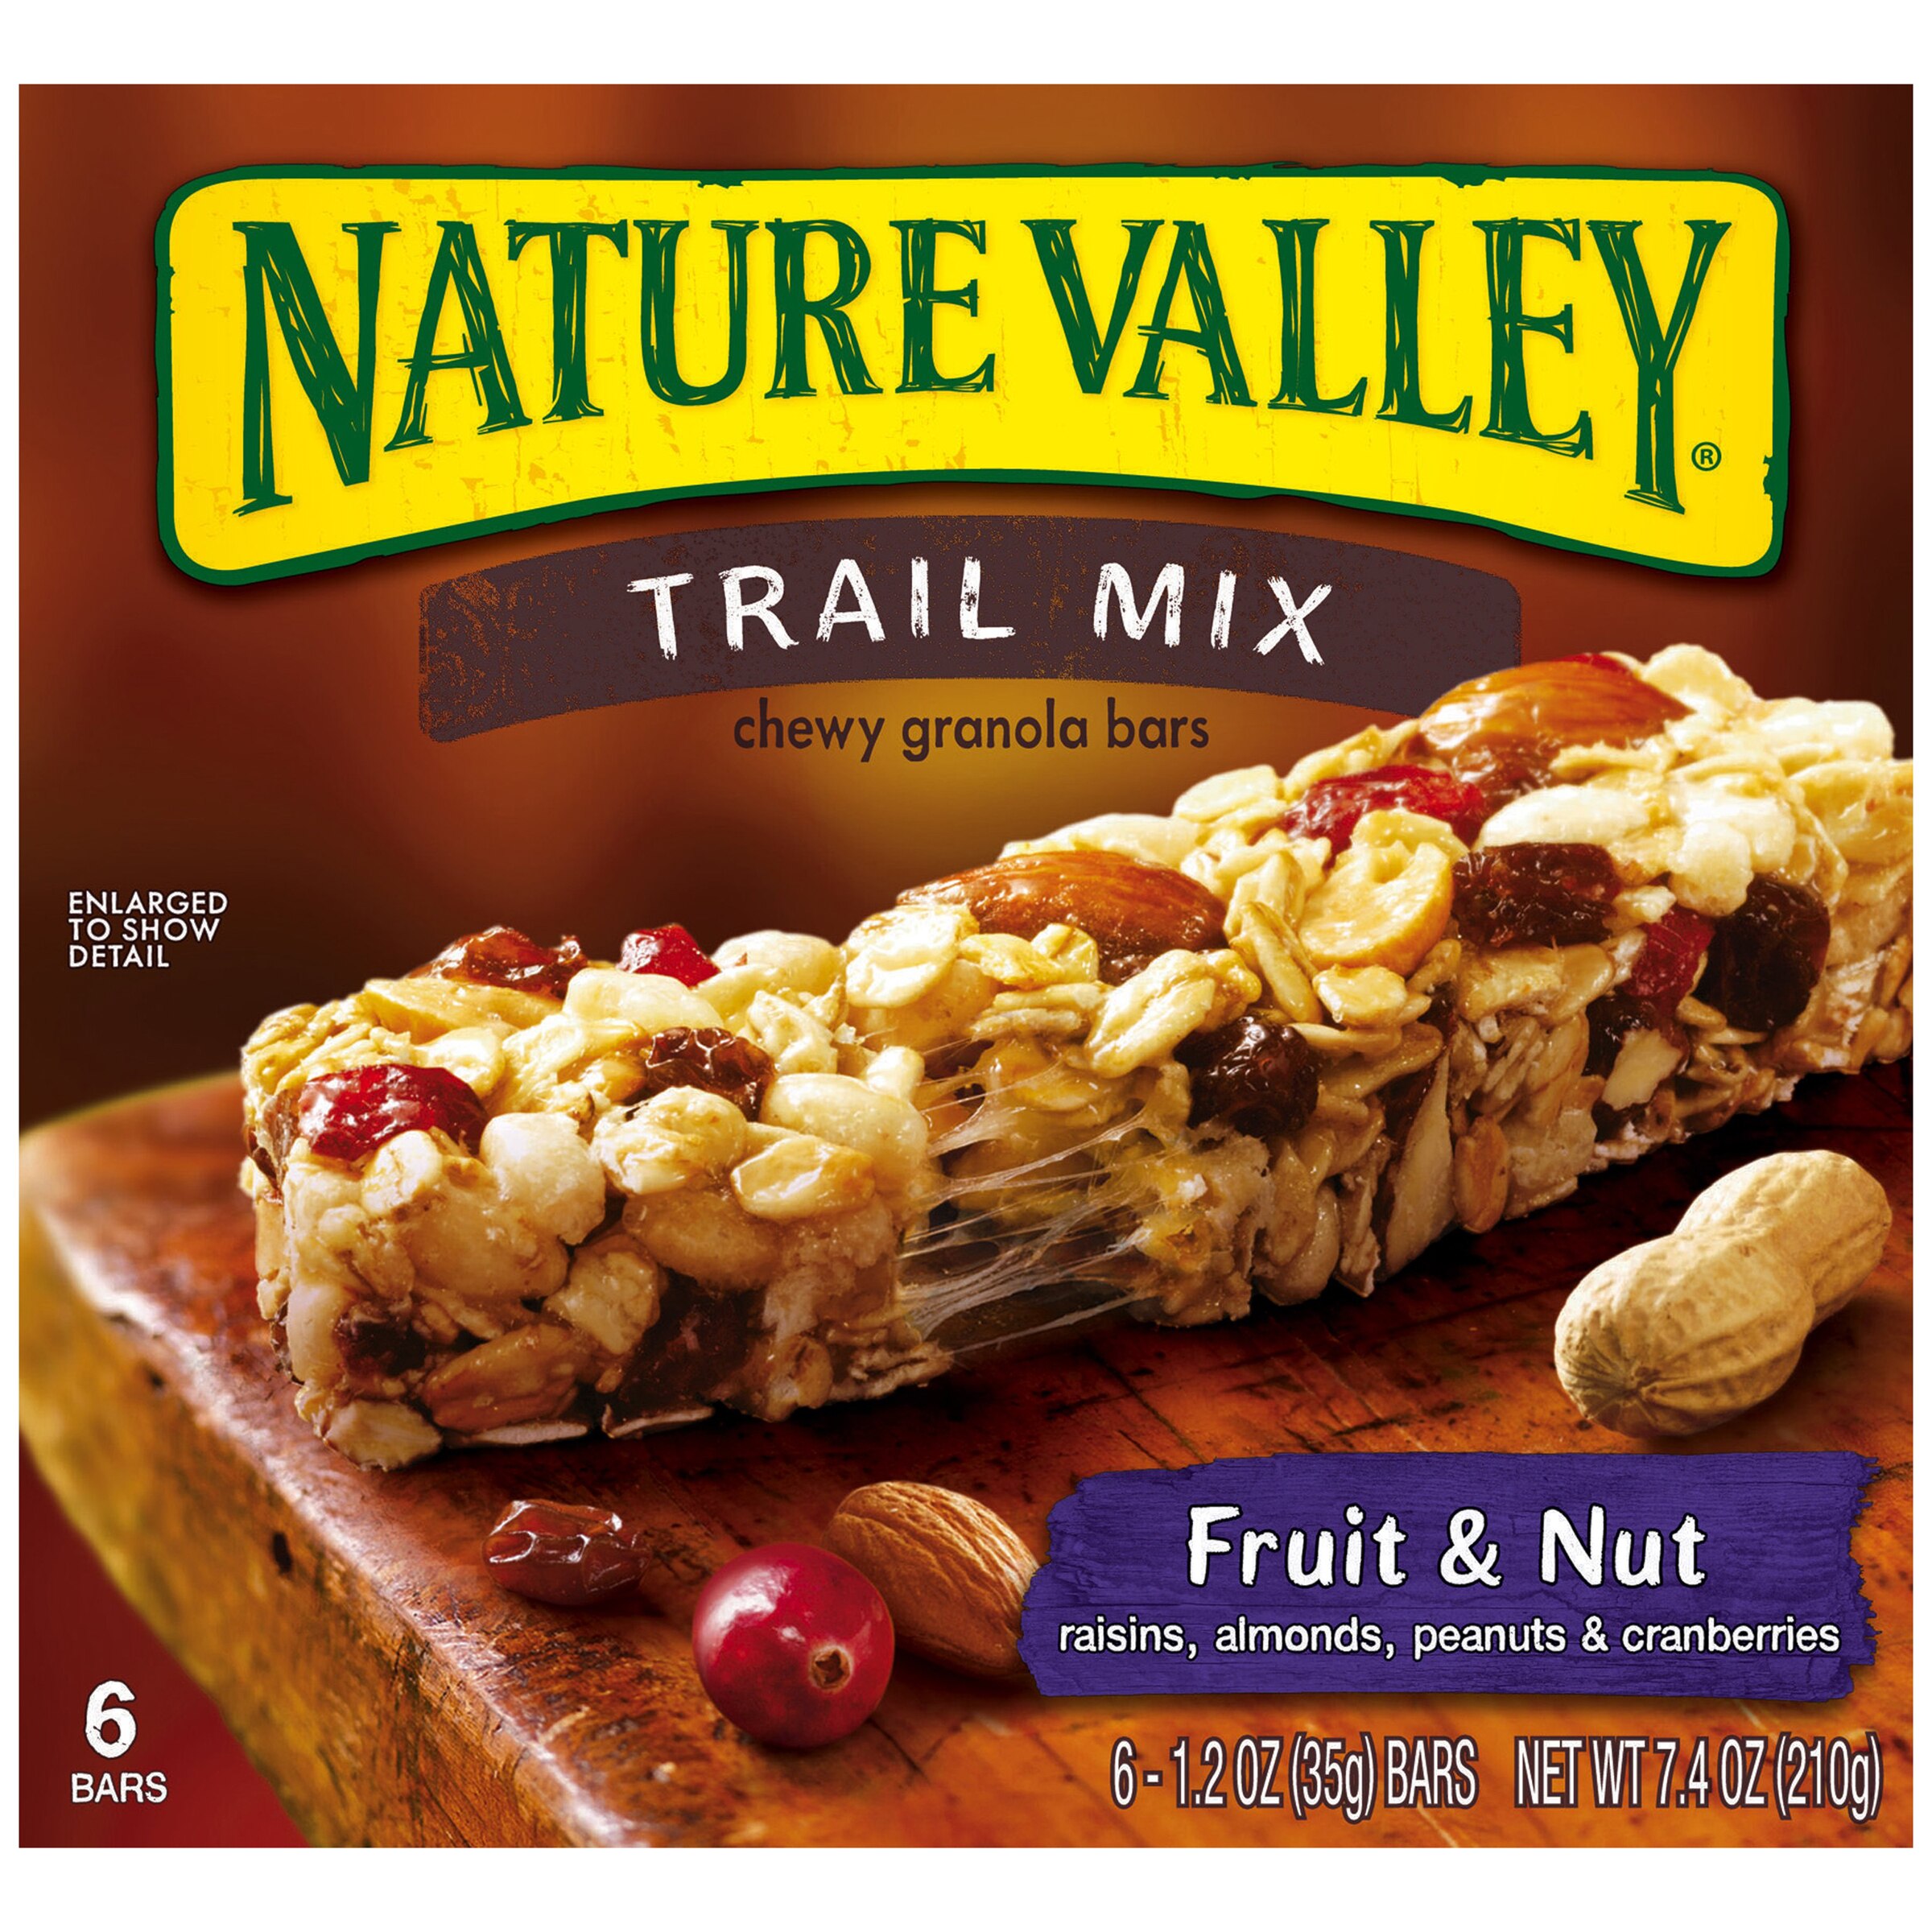 Nature Valley Trail Mix Bars, Fruit & Nut, 6 ct, 7.4 oz